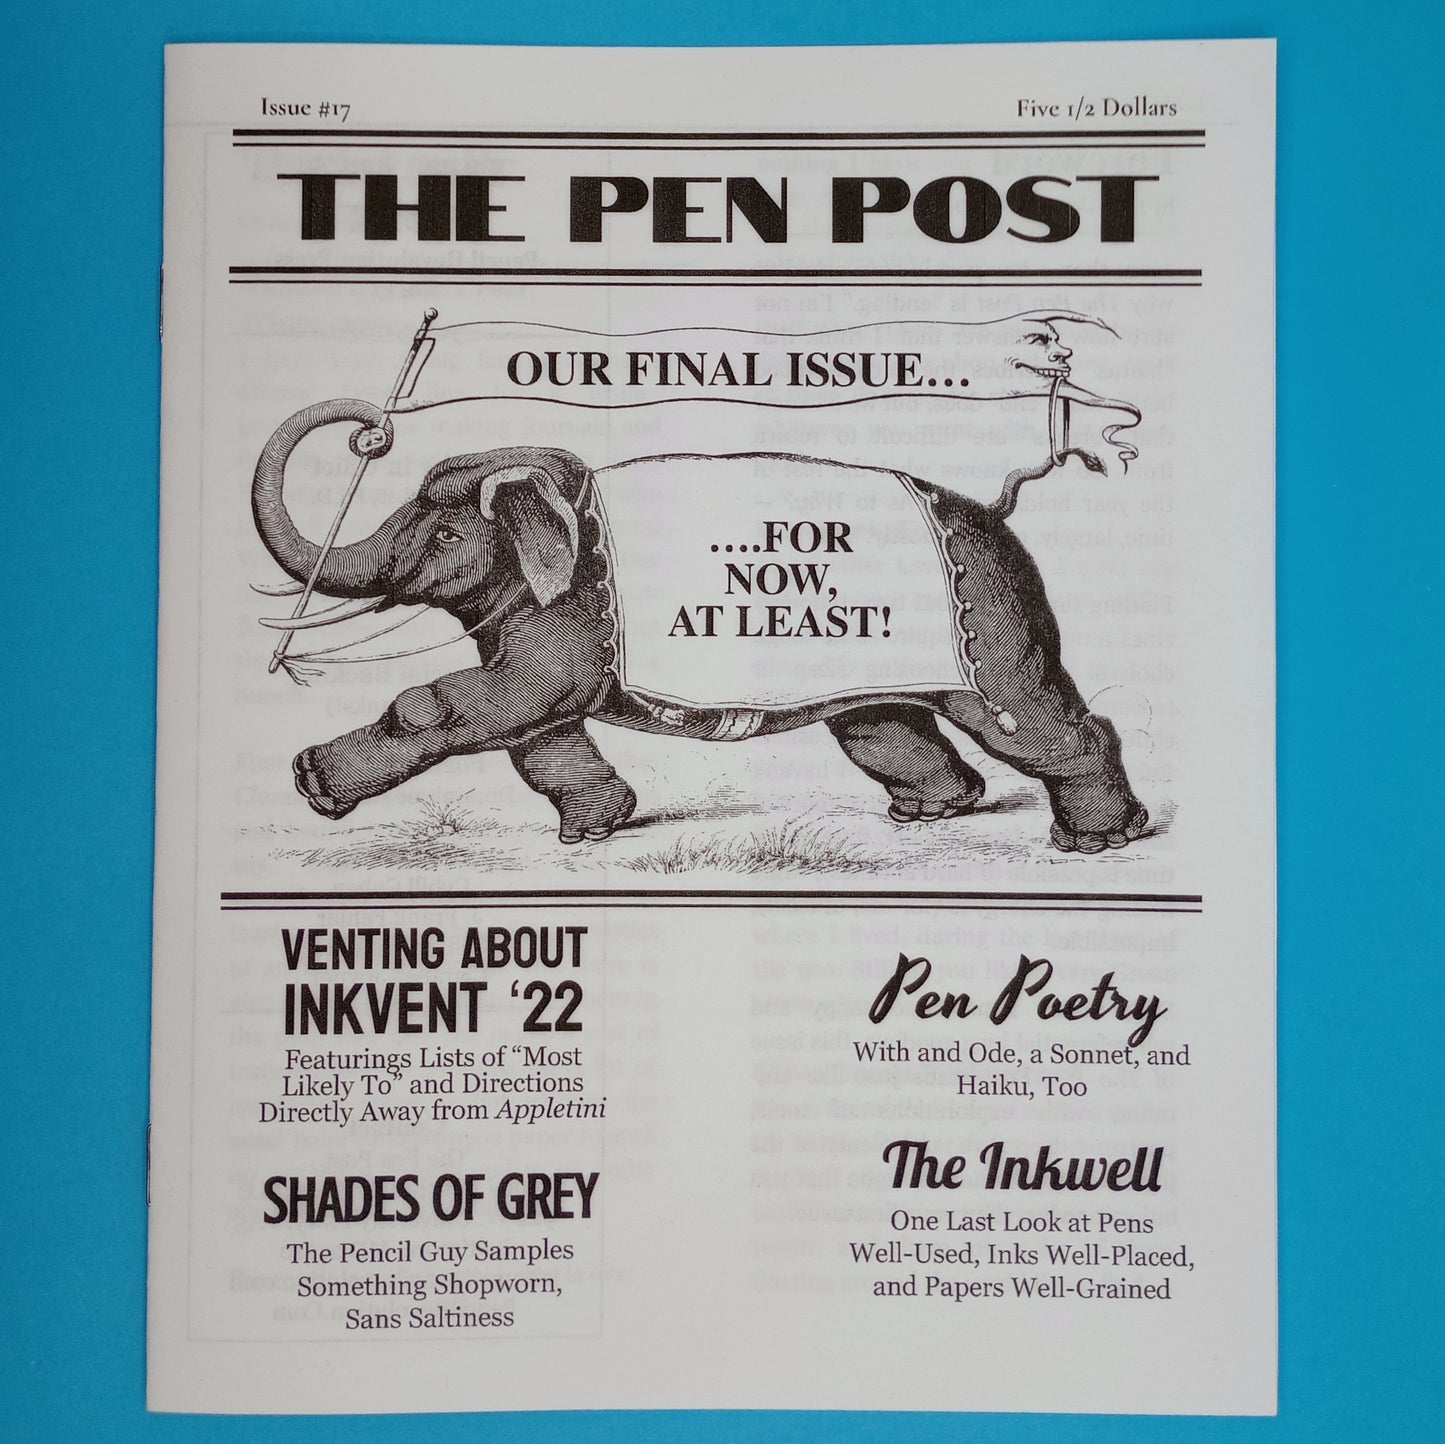 The Pen Post #17: The Final Issue